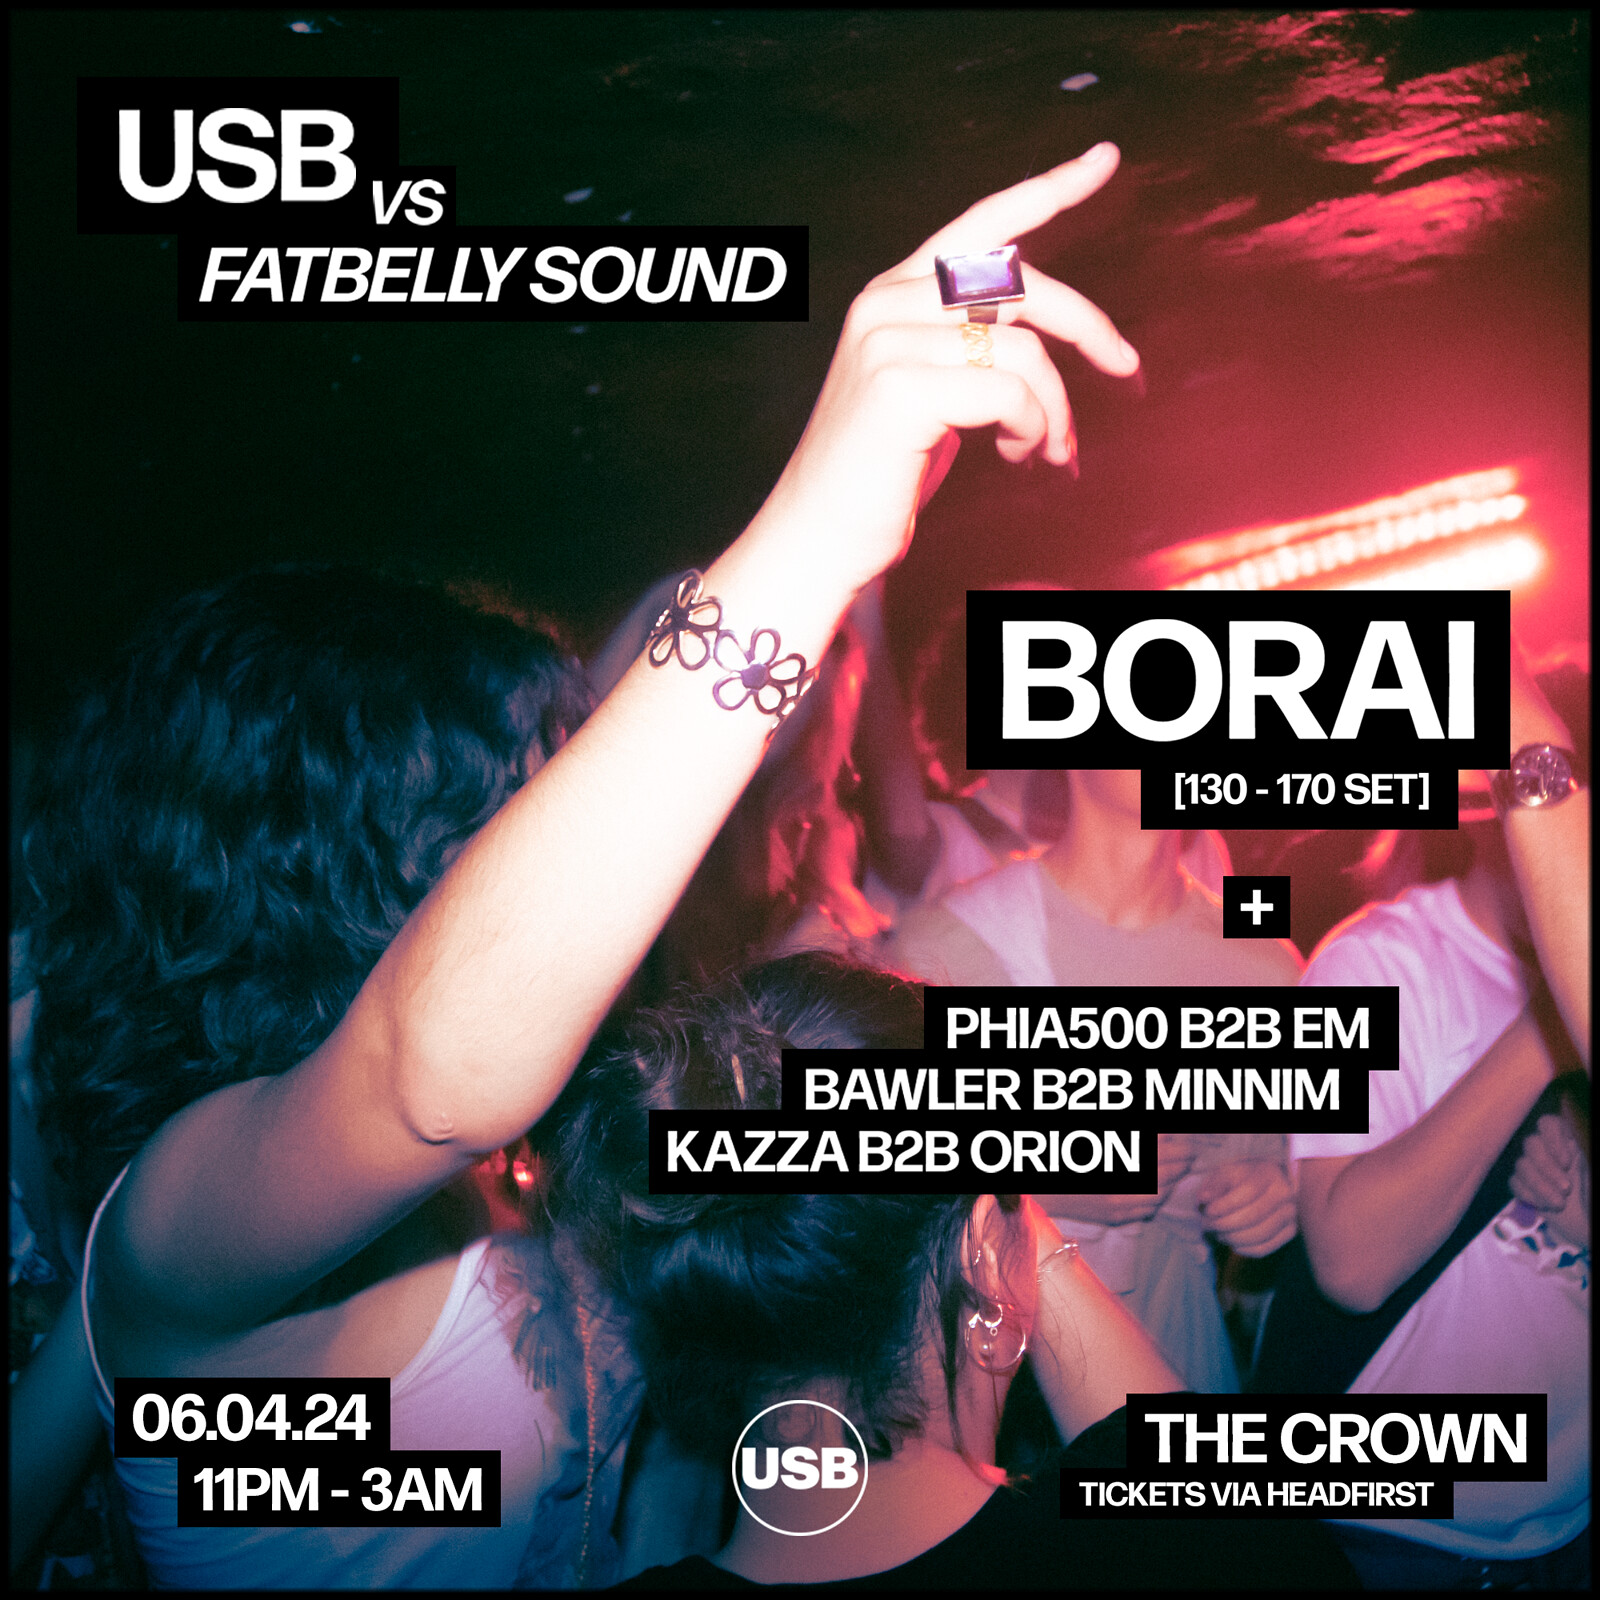 USB vs FatBellySound at The Crown